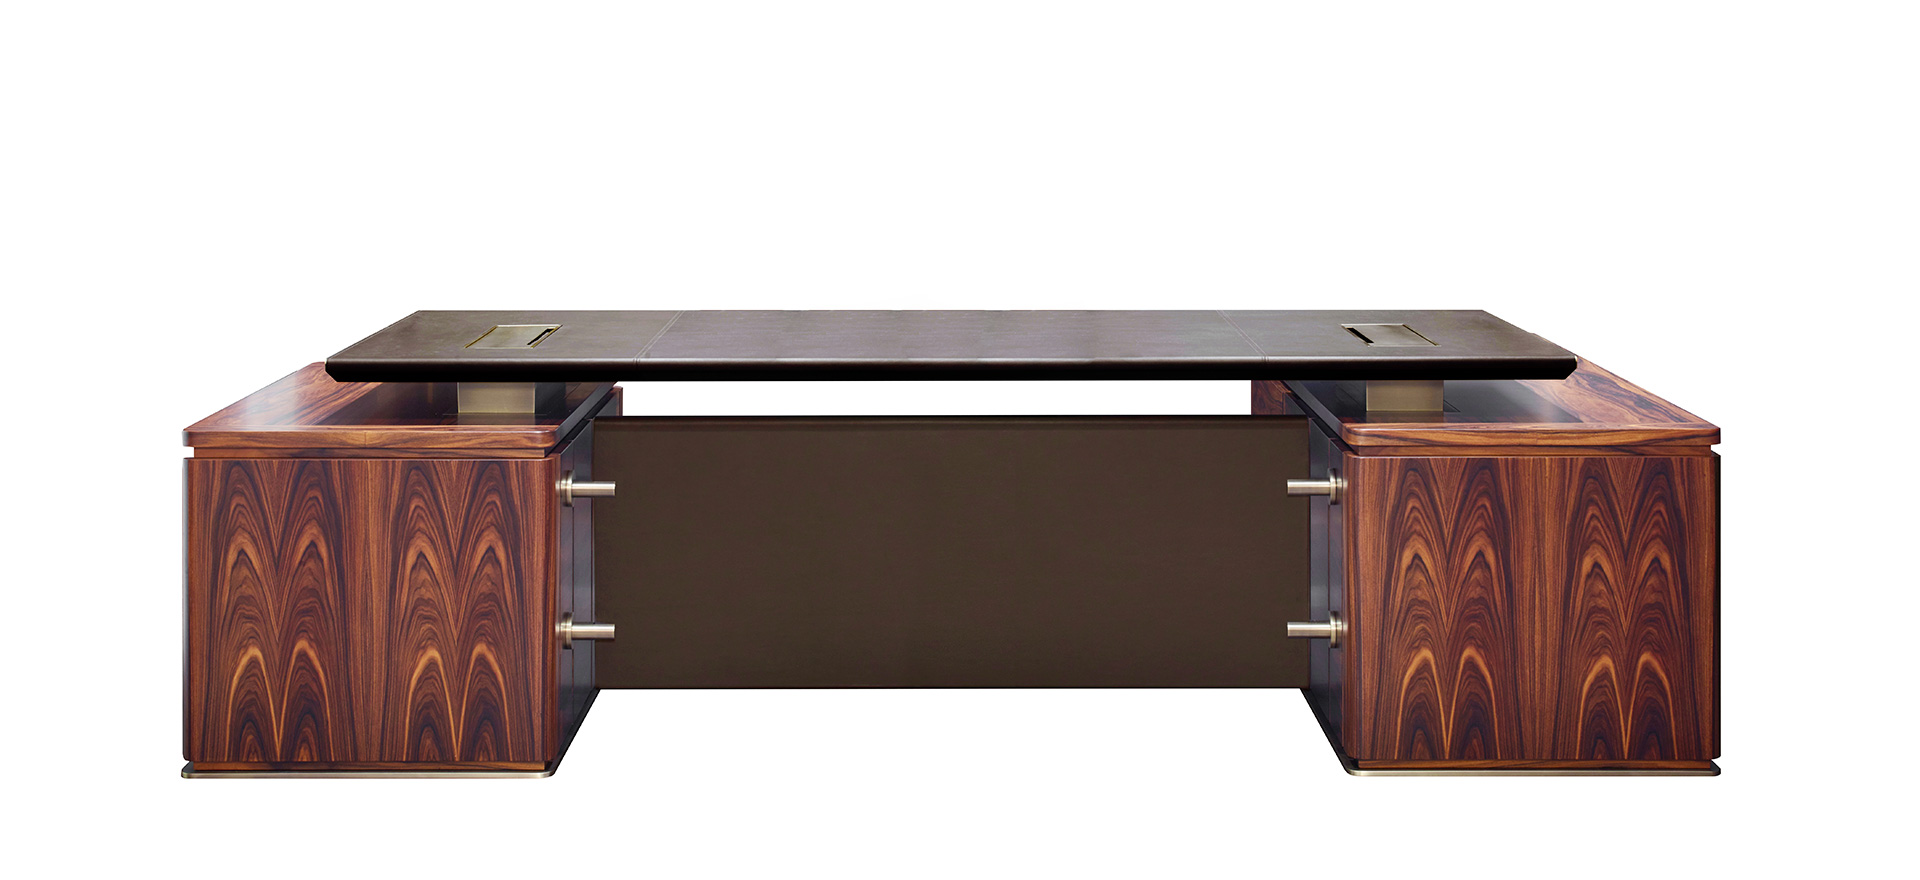 Au Bout de la Nuit is a wooden writing desk with base and details in bronze from the Promemoria's catalogue, that has been designed by Davide Sozzi in 2016 | Promemoria